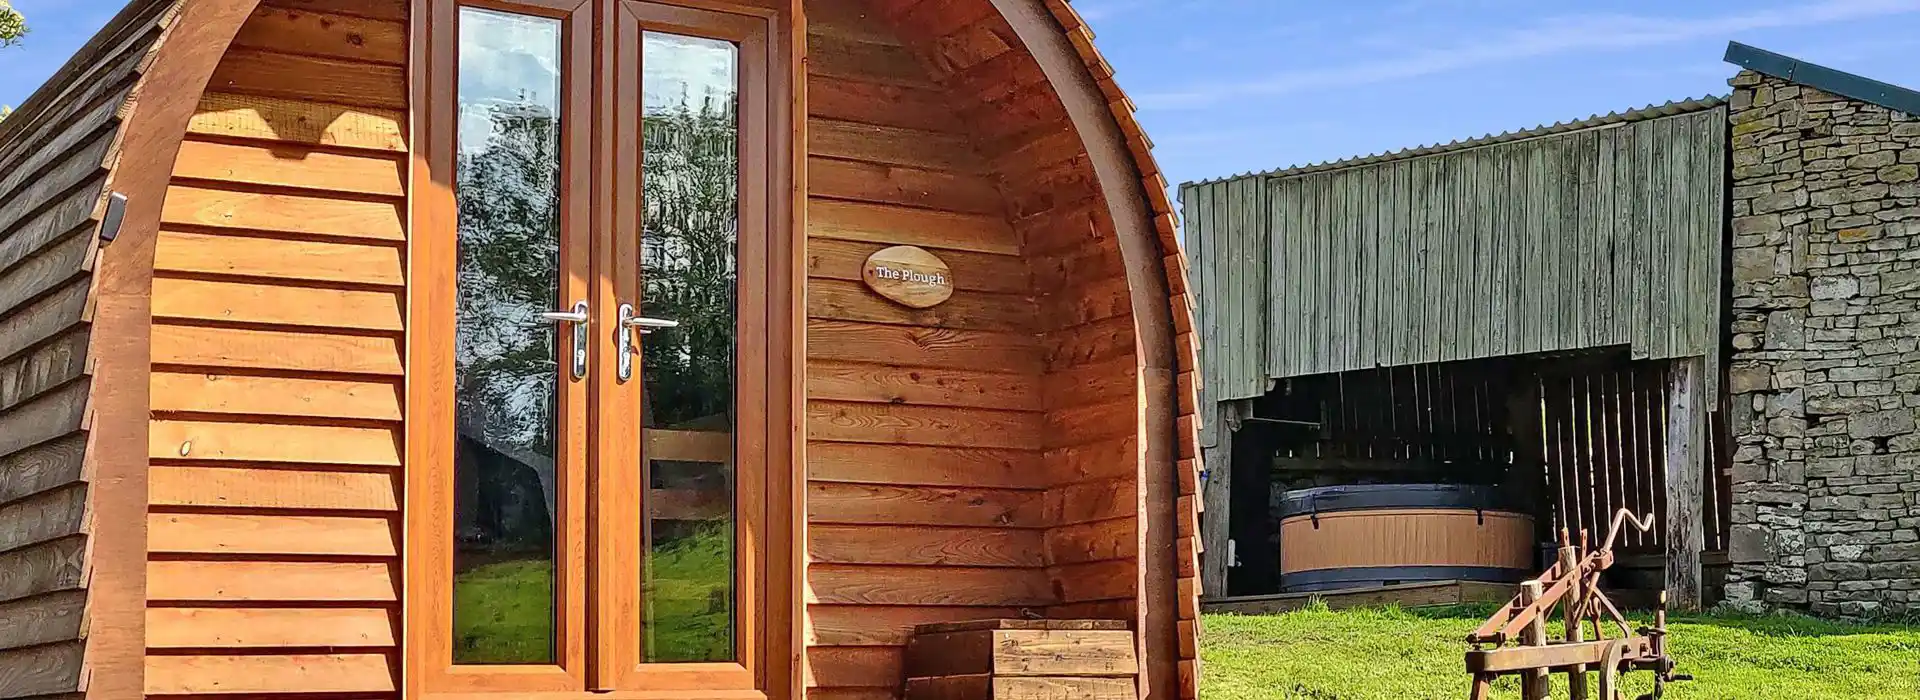 Camping and glamping pods in Kirkby Lonsdale